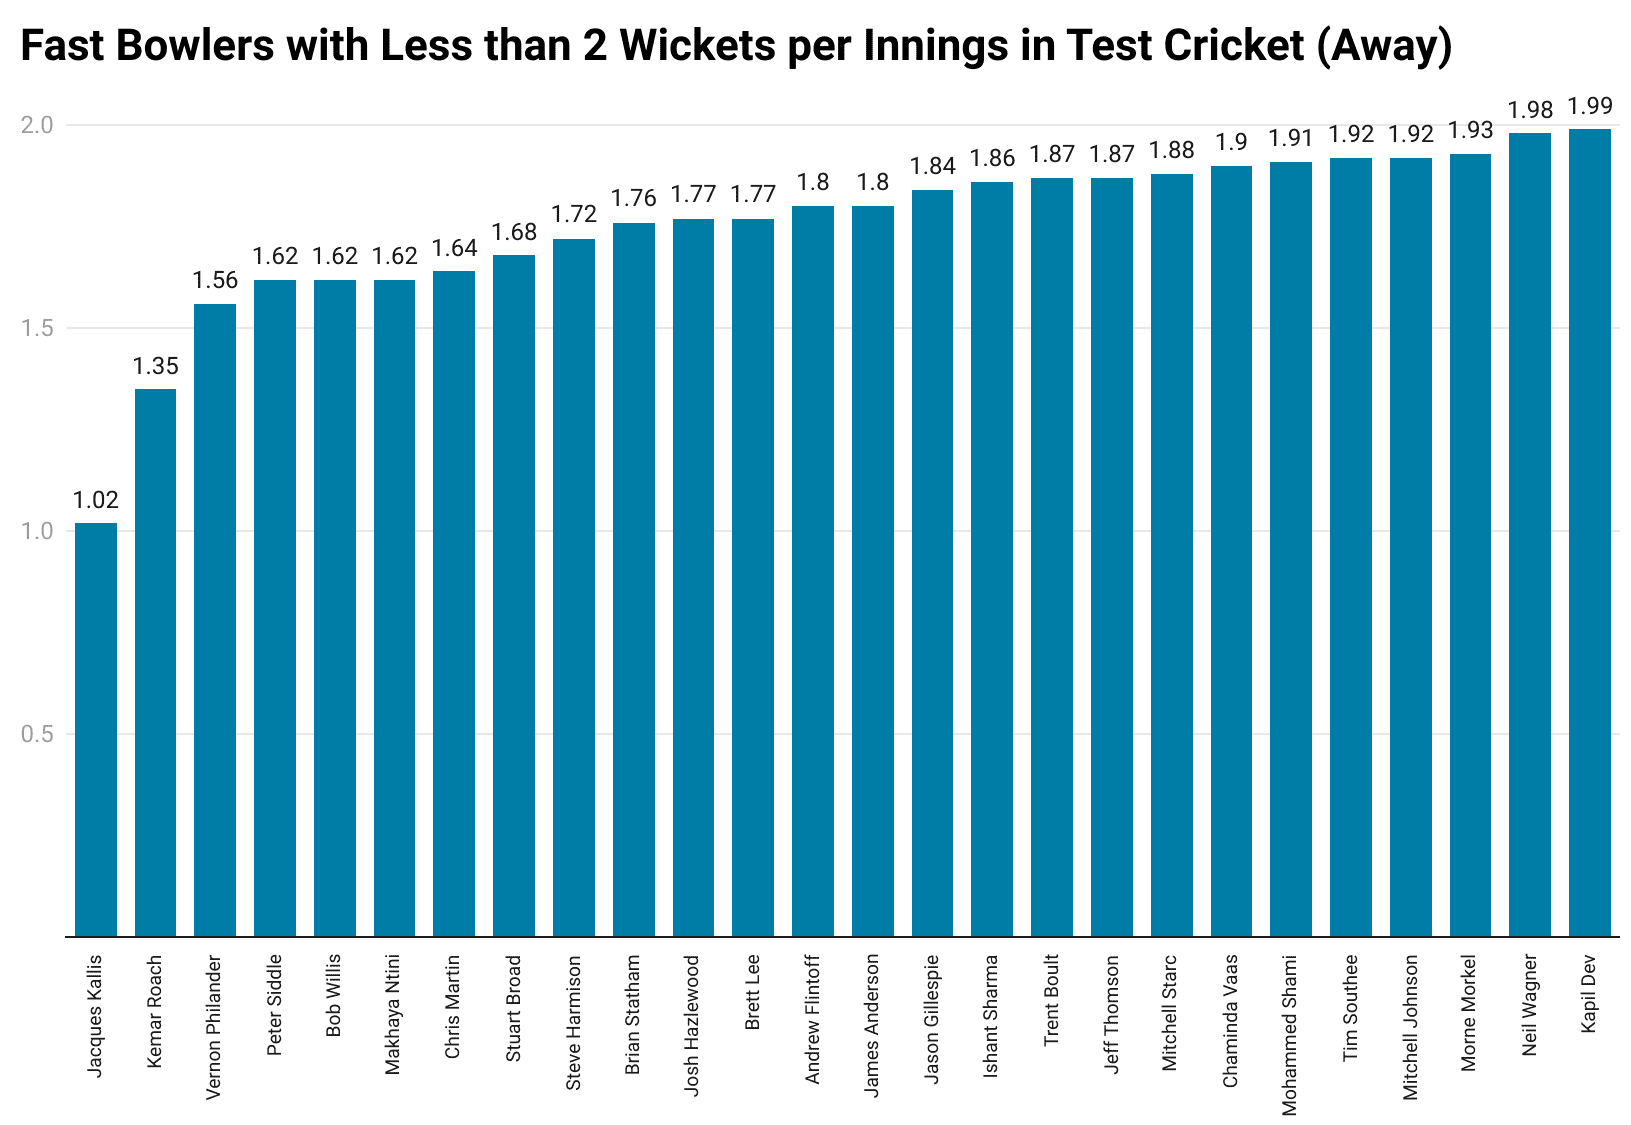 Fast Bowlers with Less than 2 Wickets per Innings in Test Cricket in Away Matches